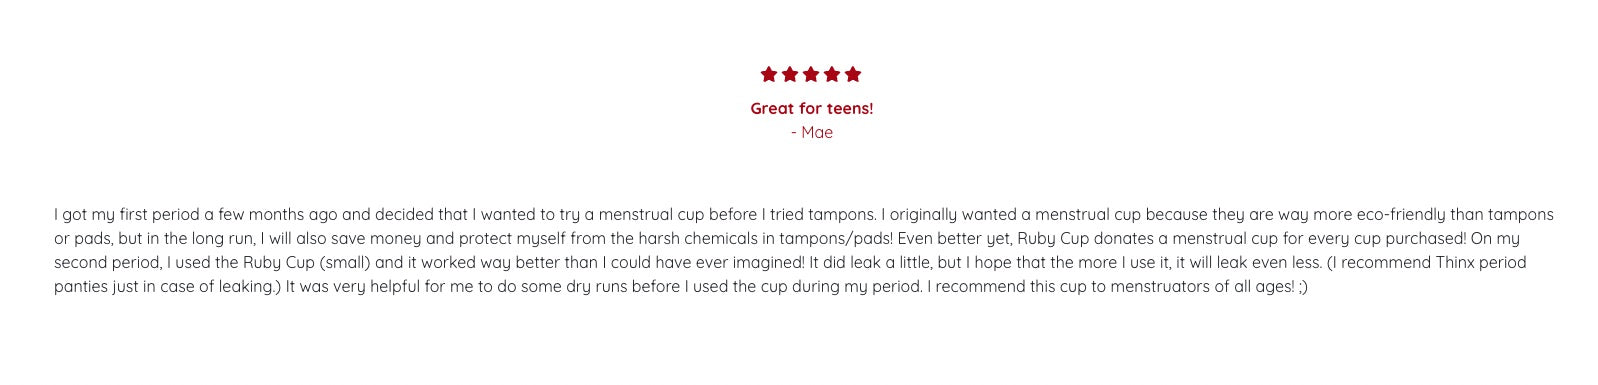  Ruby Cup review about how great a menstrual cup is for teens